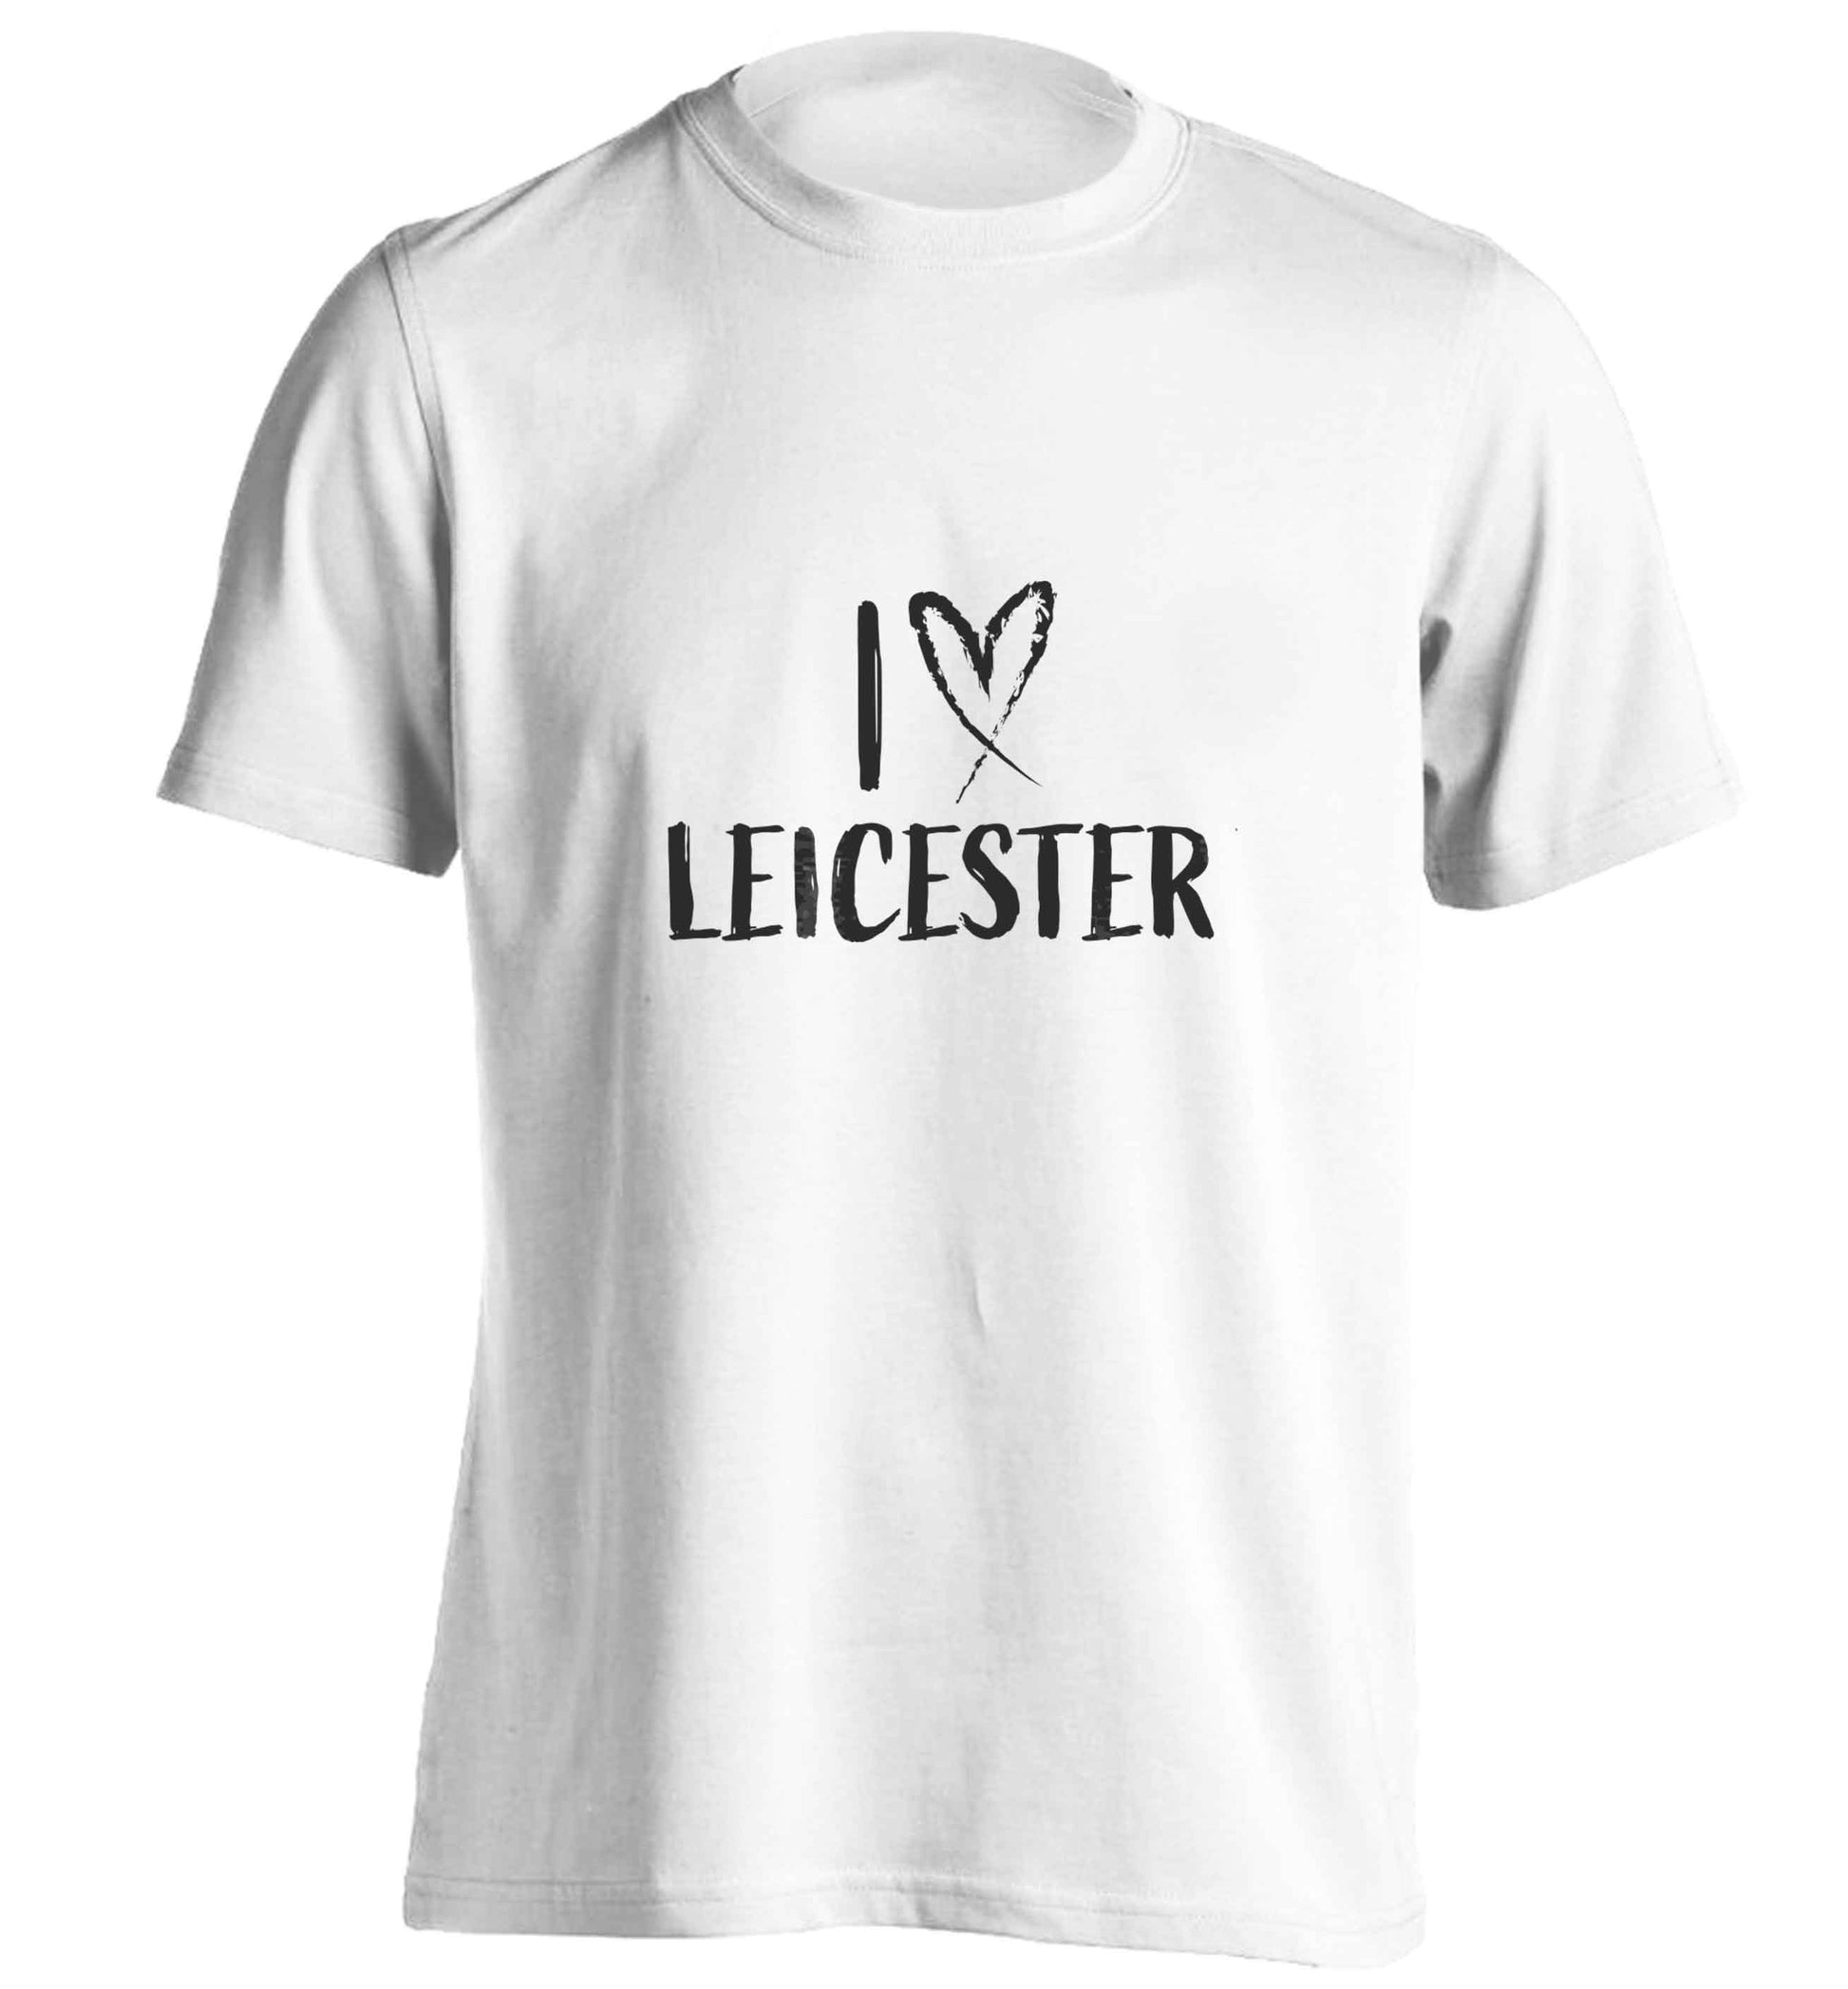 I love Leicester adults unisex white Tshirt 2XL